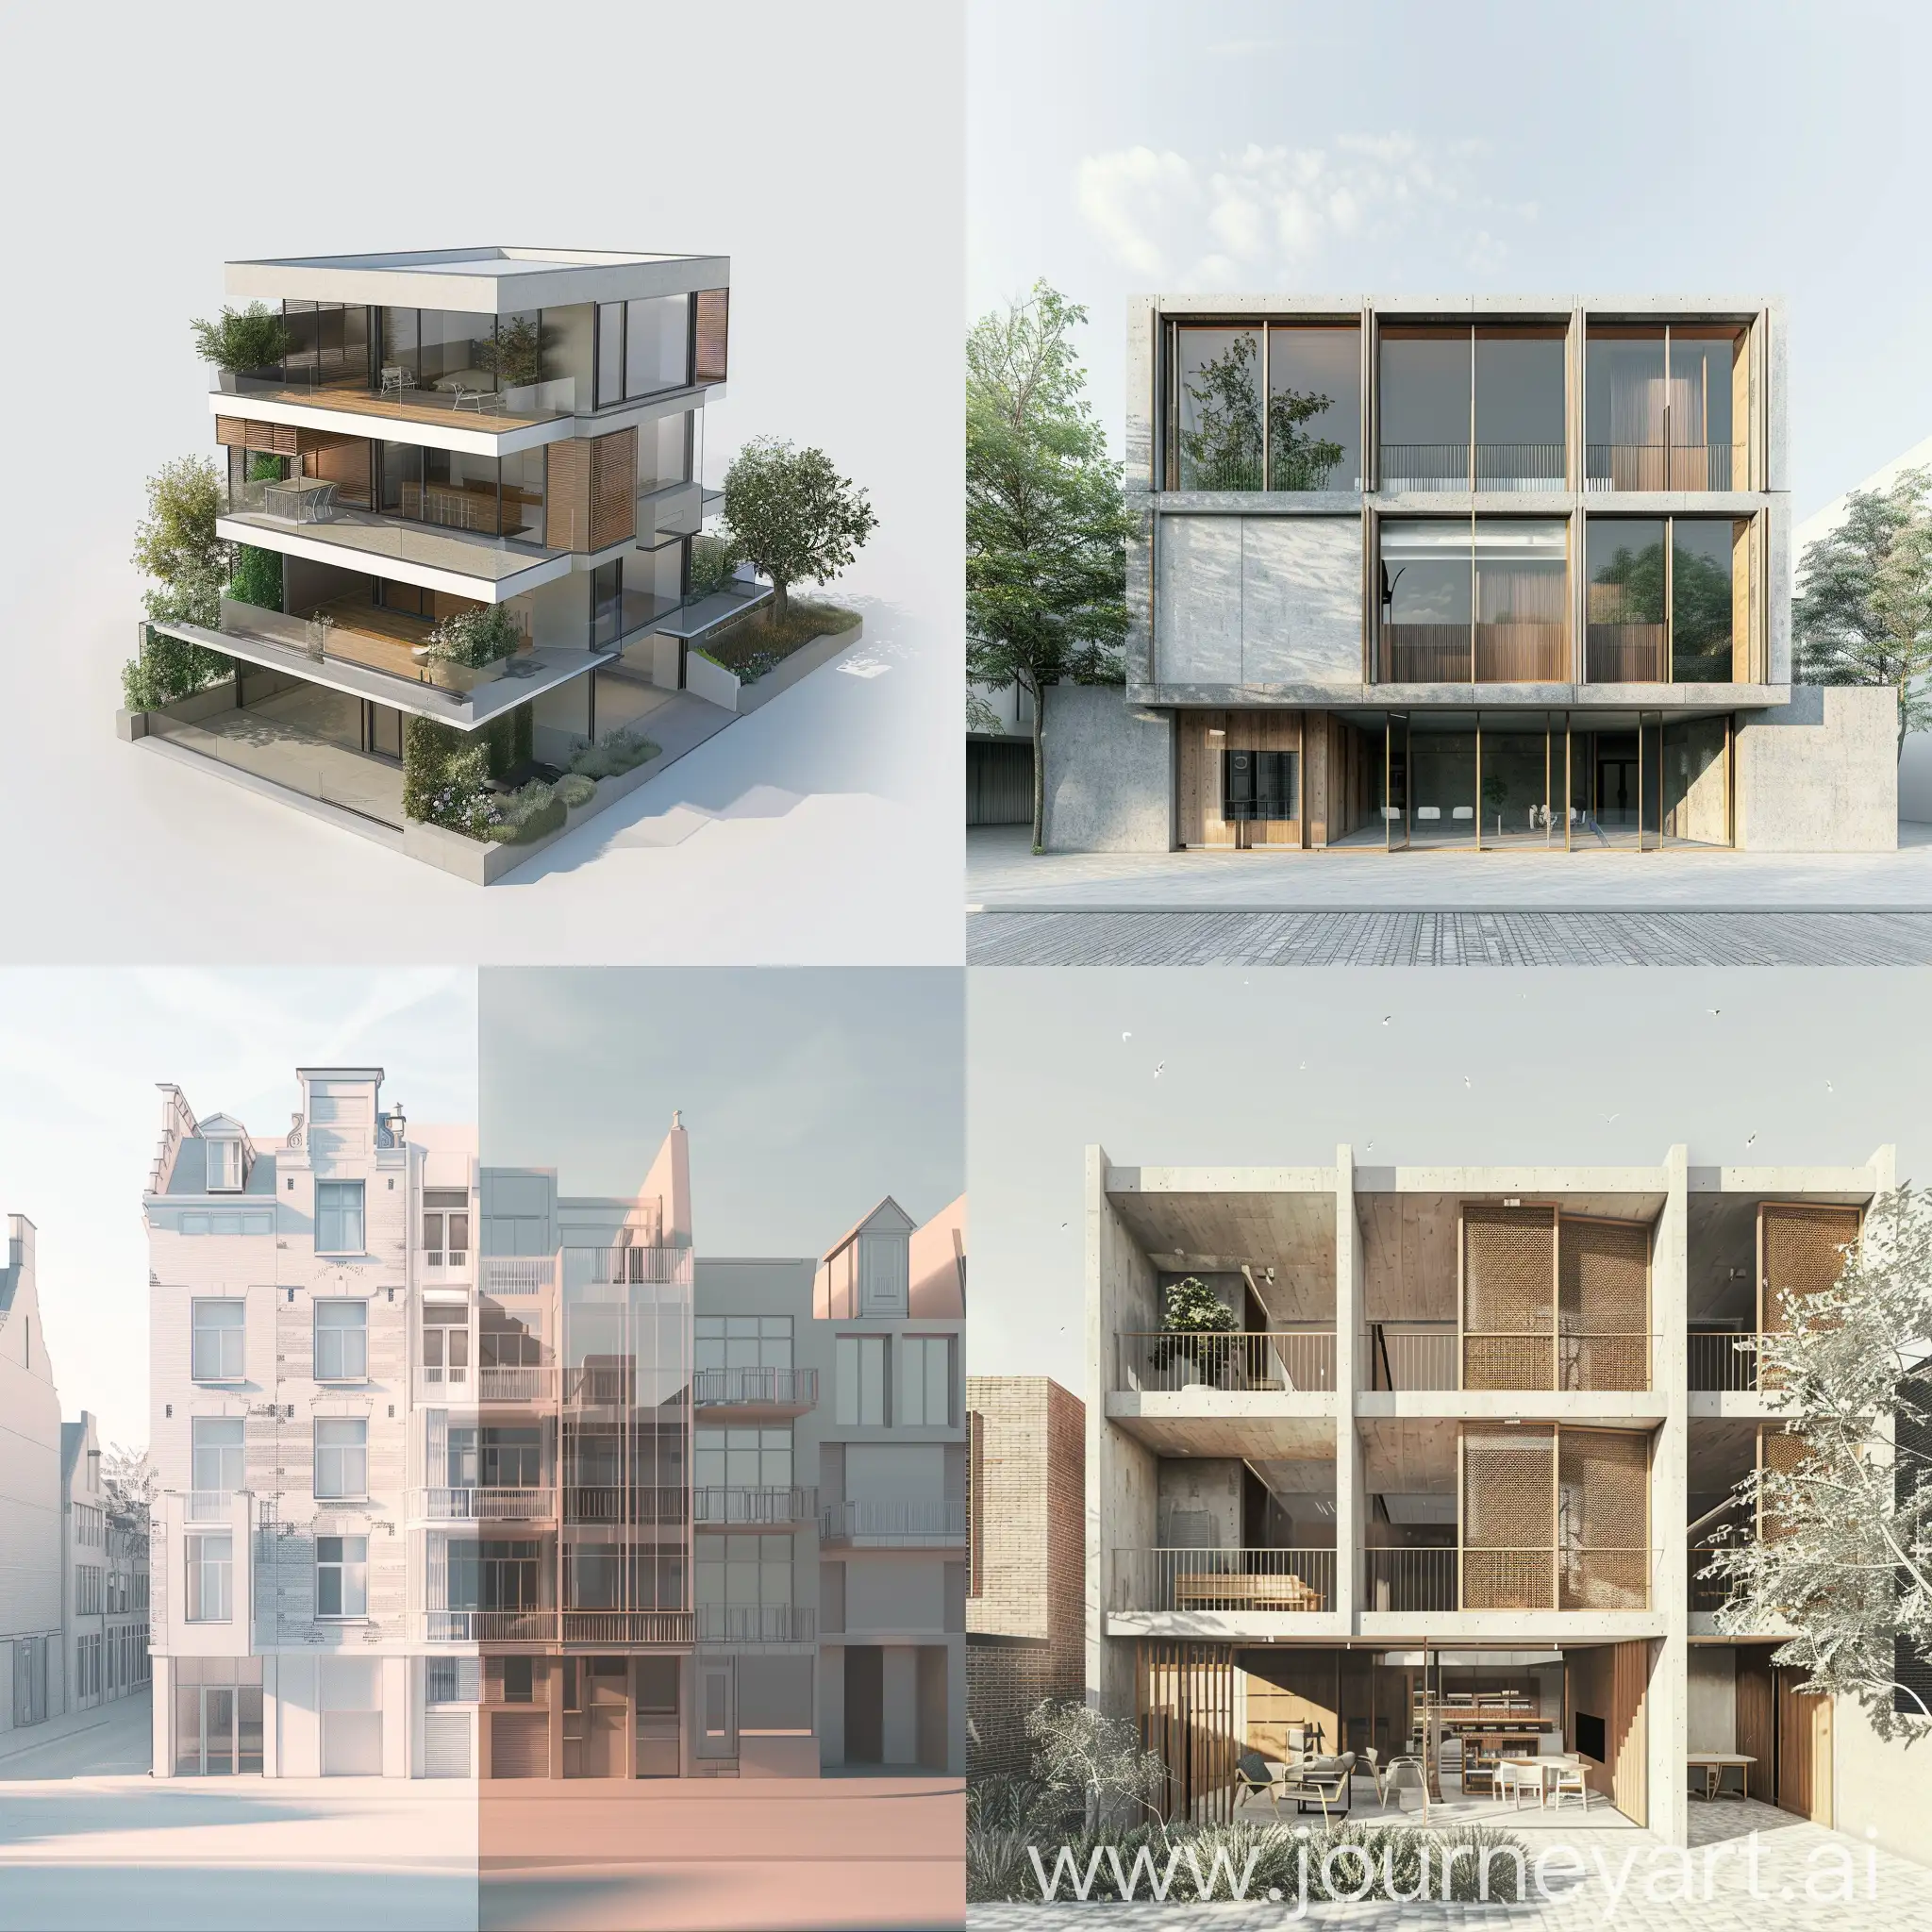 Architectural-Planning-Inferring-a-Plan-from-a-3D-Facade